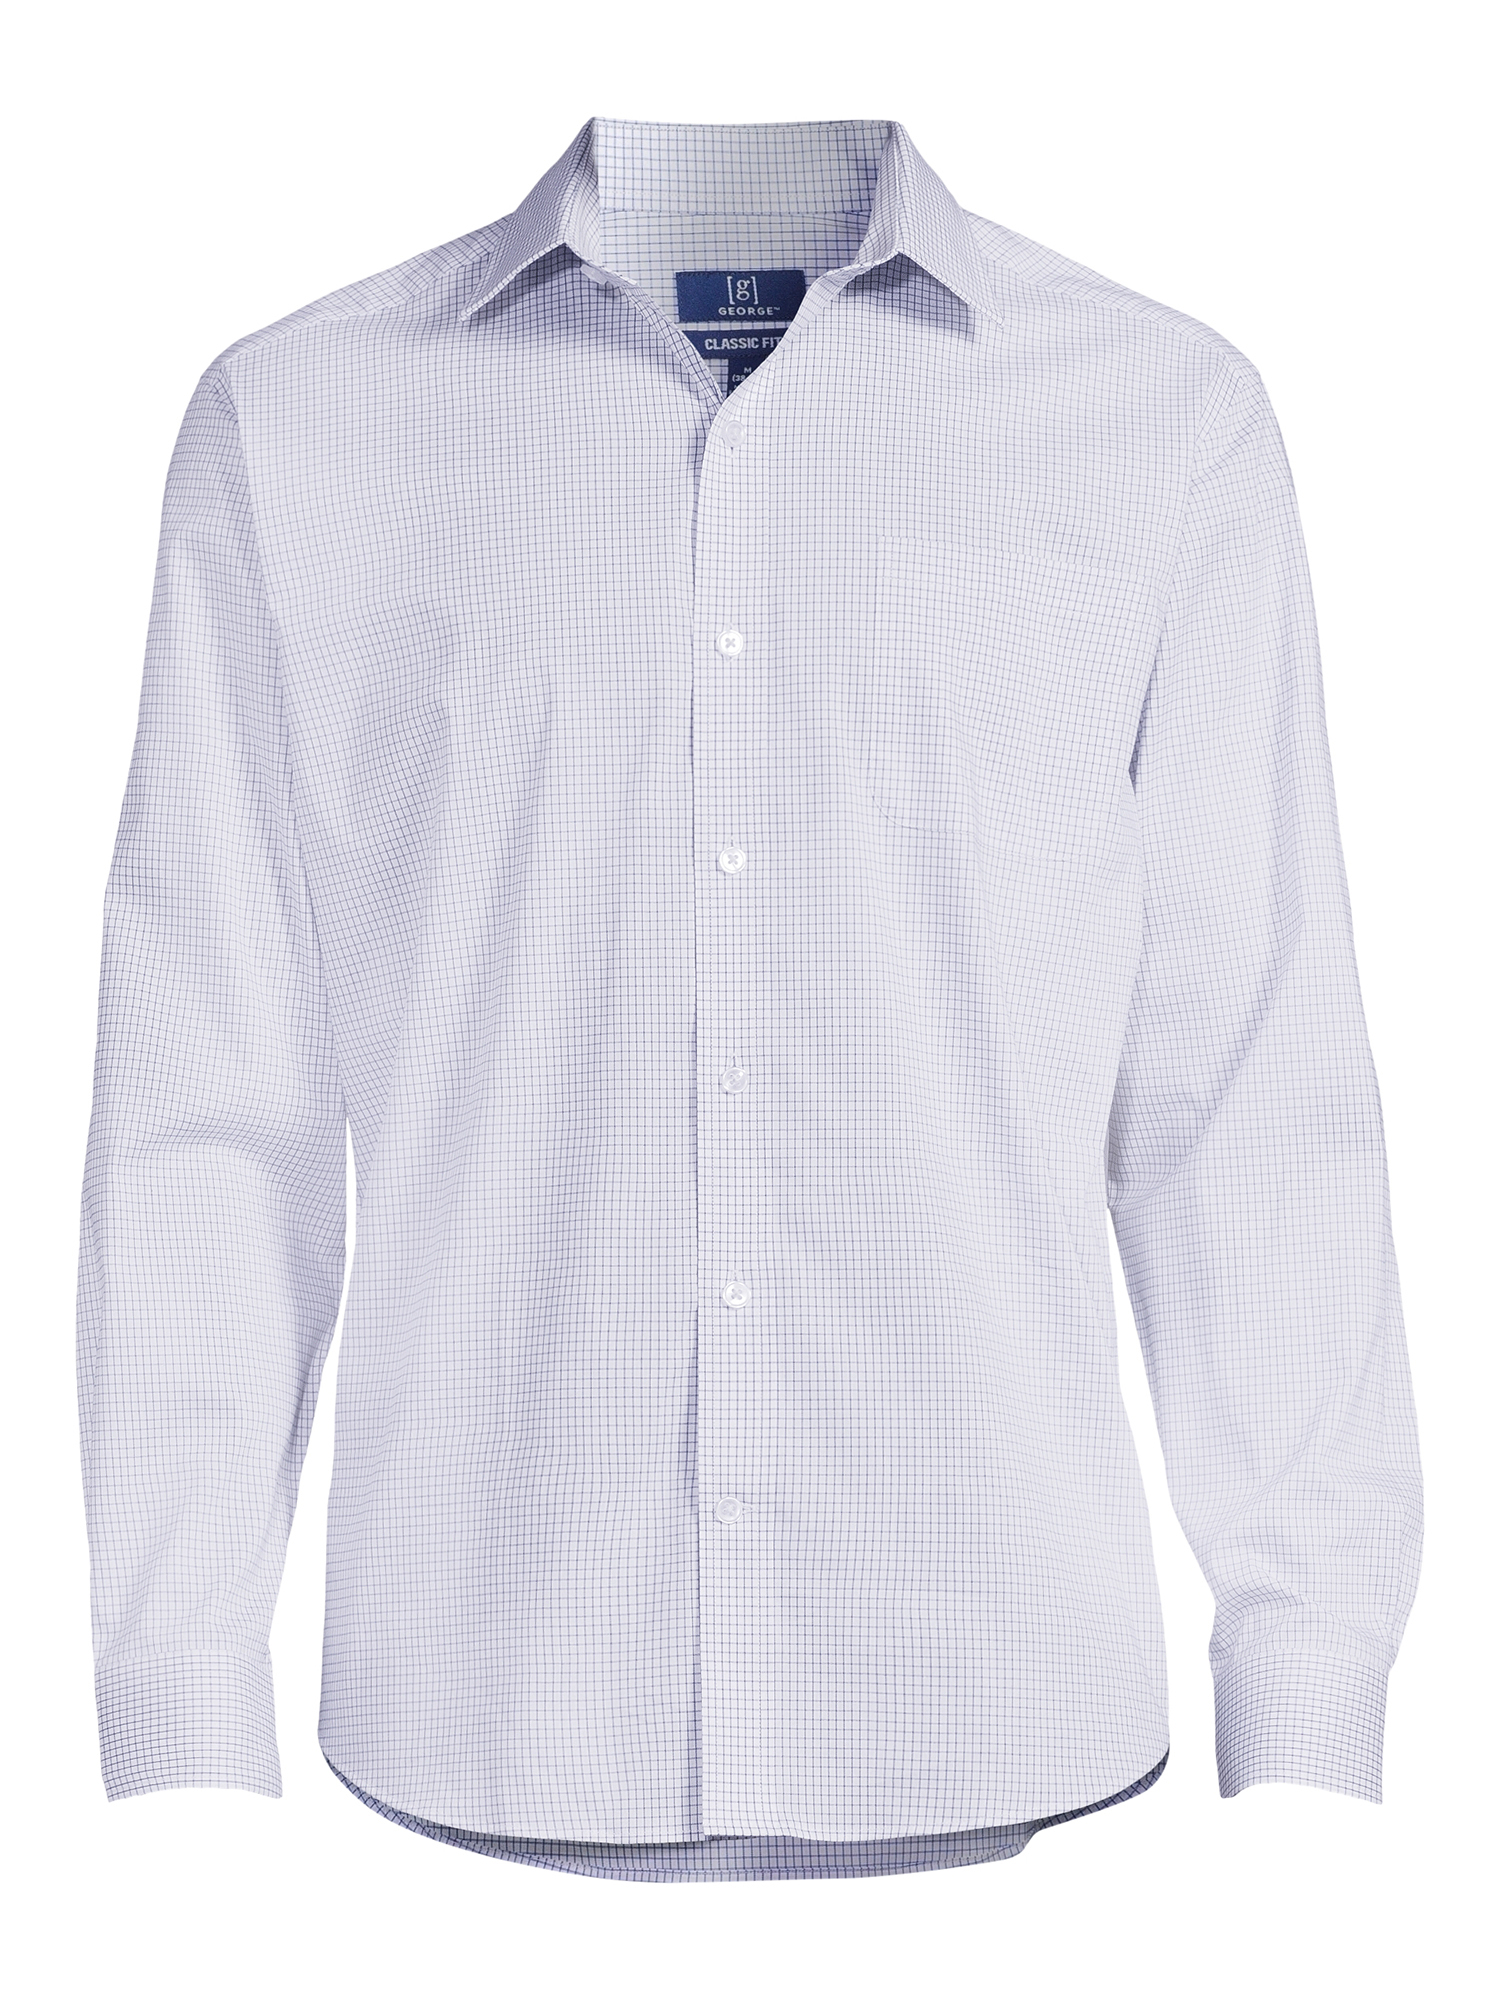 George Men's Classic Dress Shirt with Long Sleeves, Sizes S-3XL - image 5 of 5